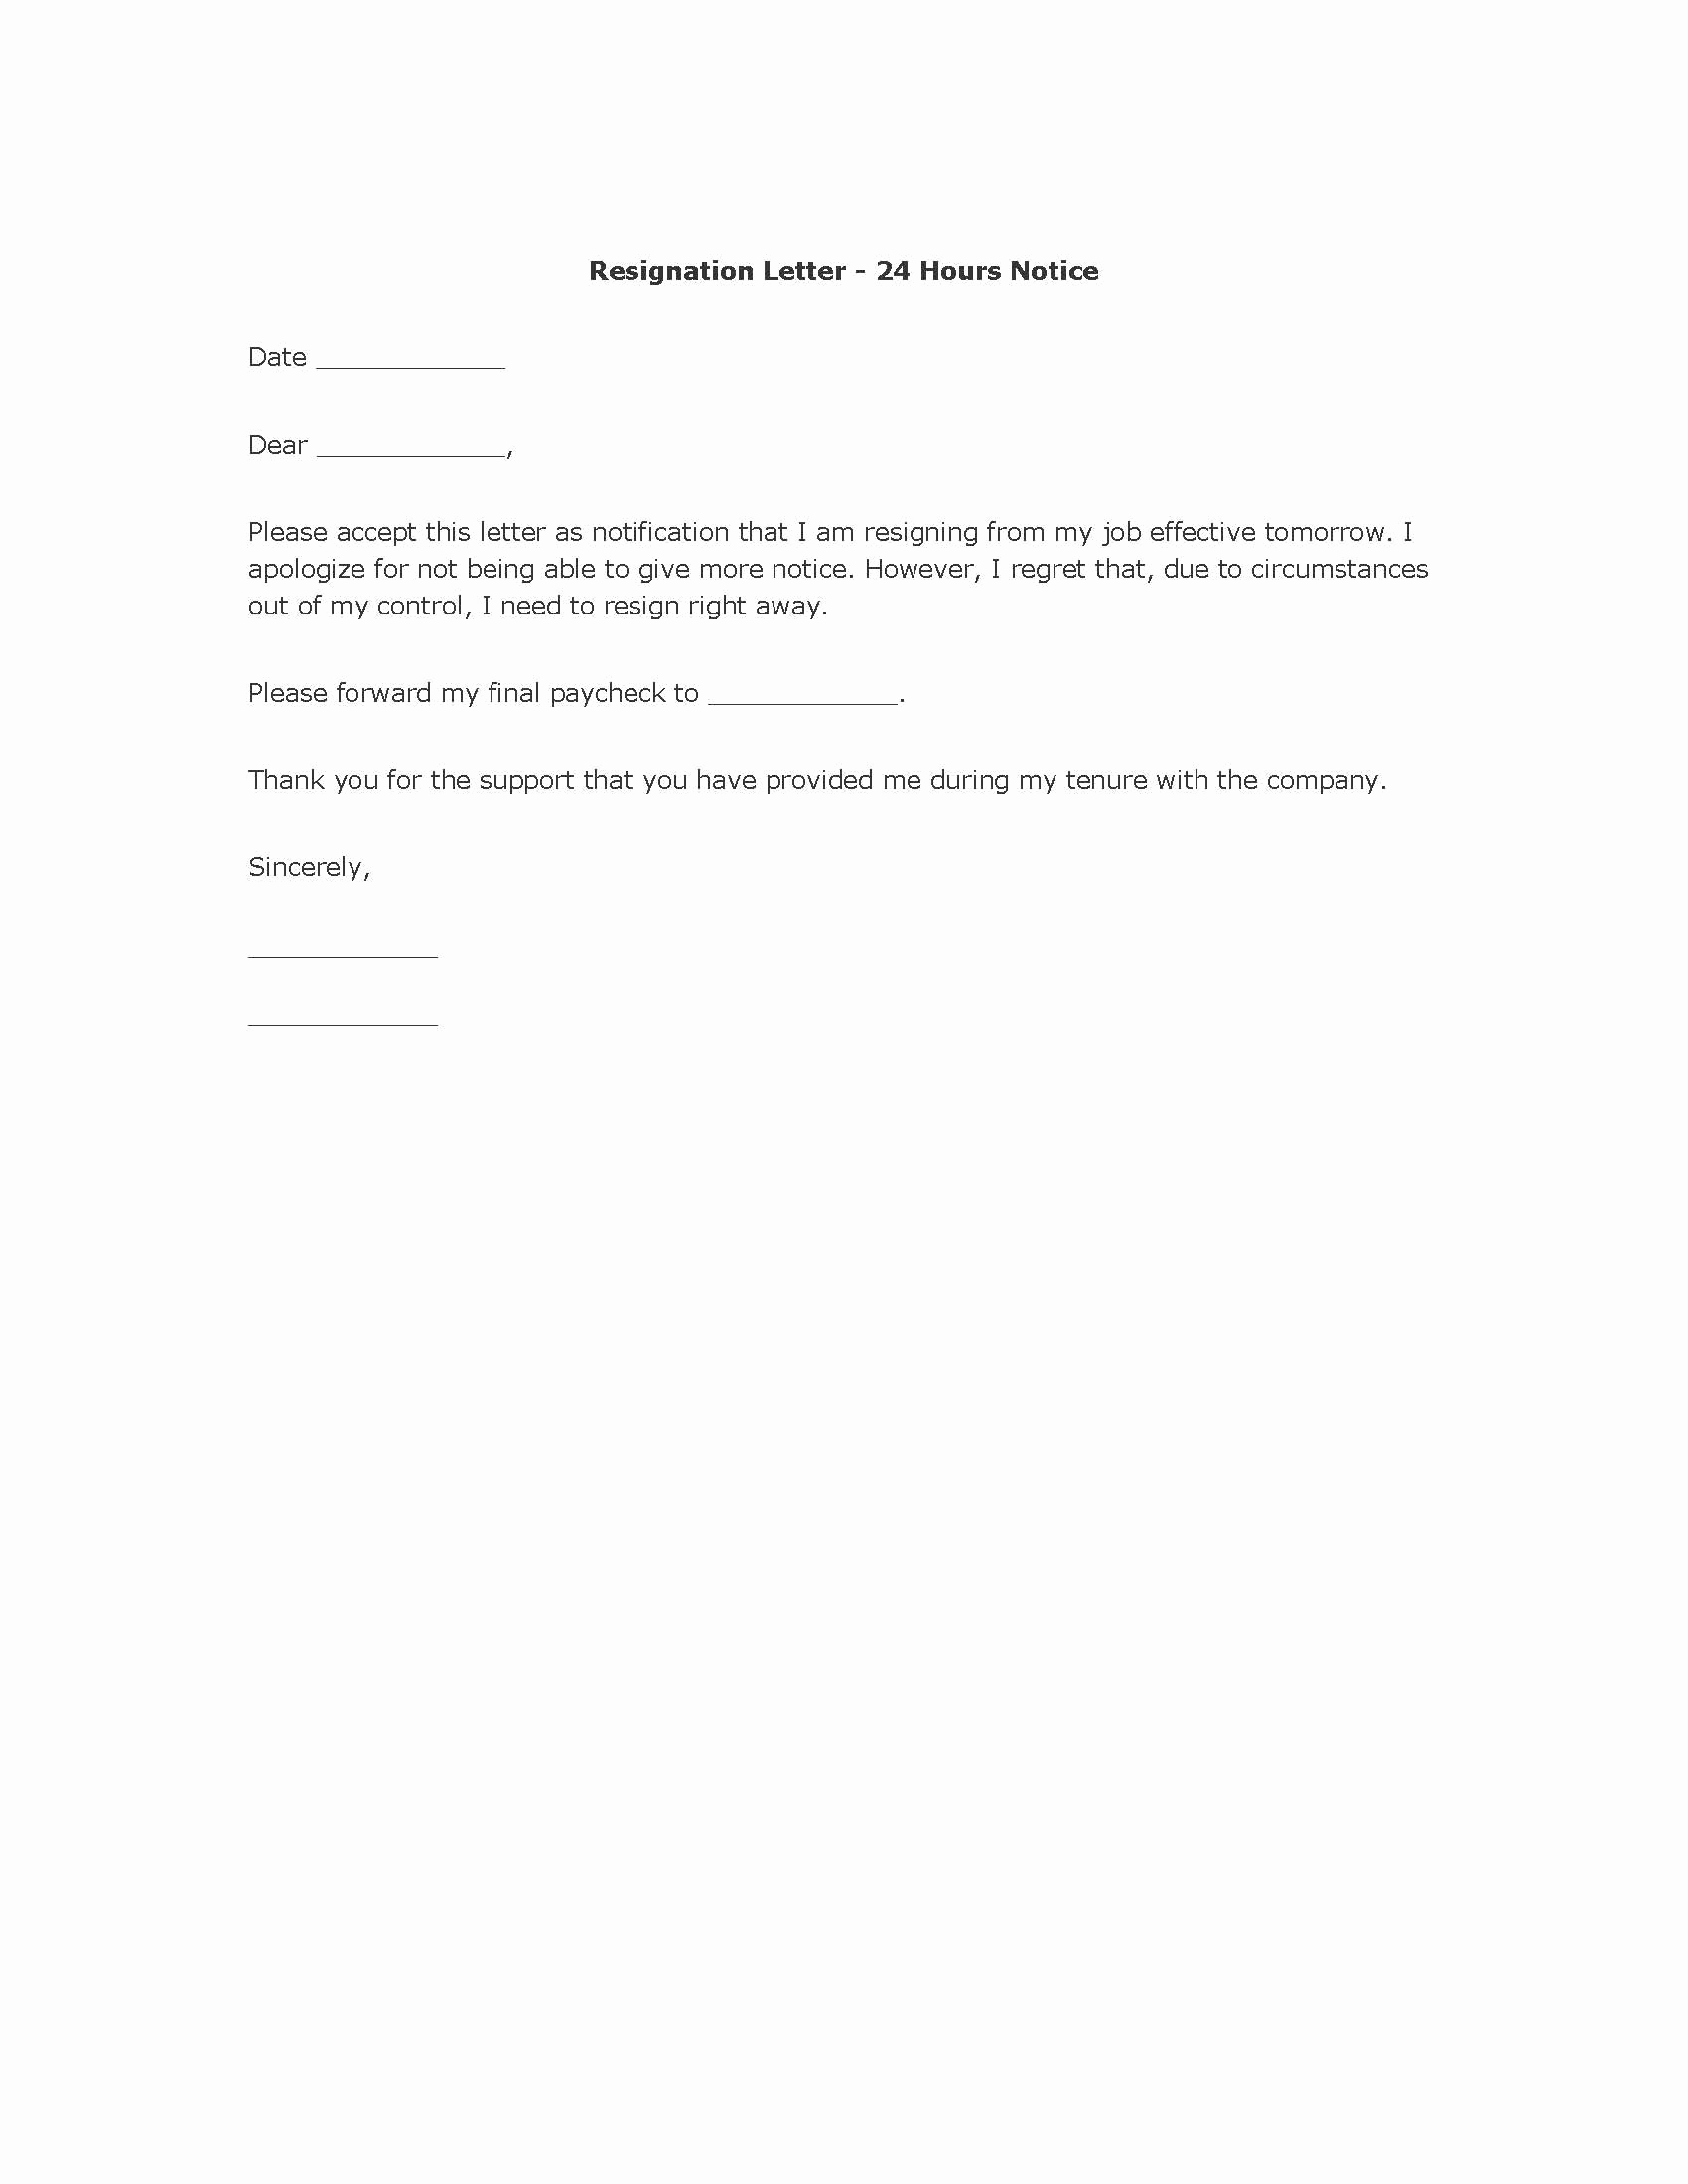 Letter Of Resignation Template Free Best Of Resignation Letter and Post Employment Re Mendation